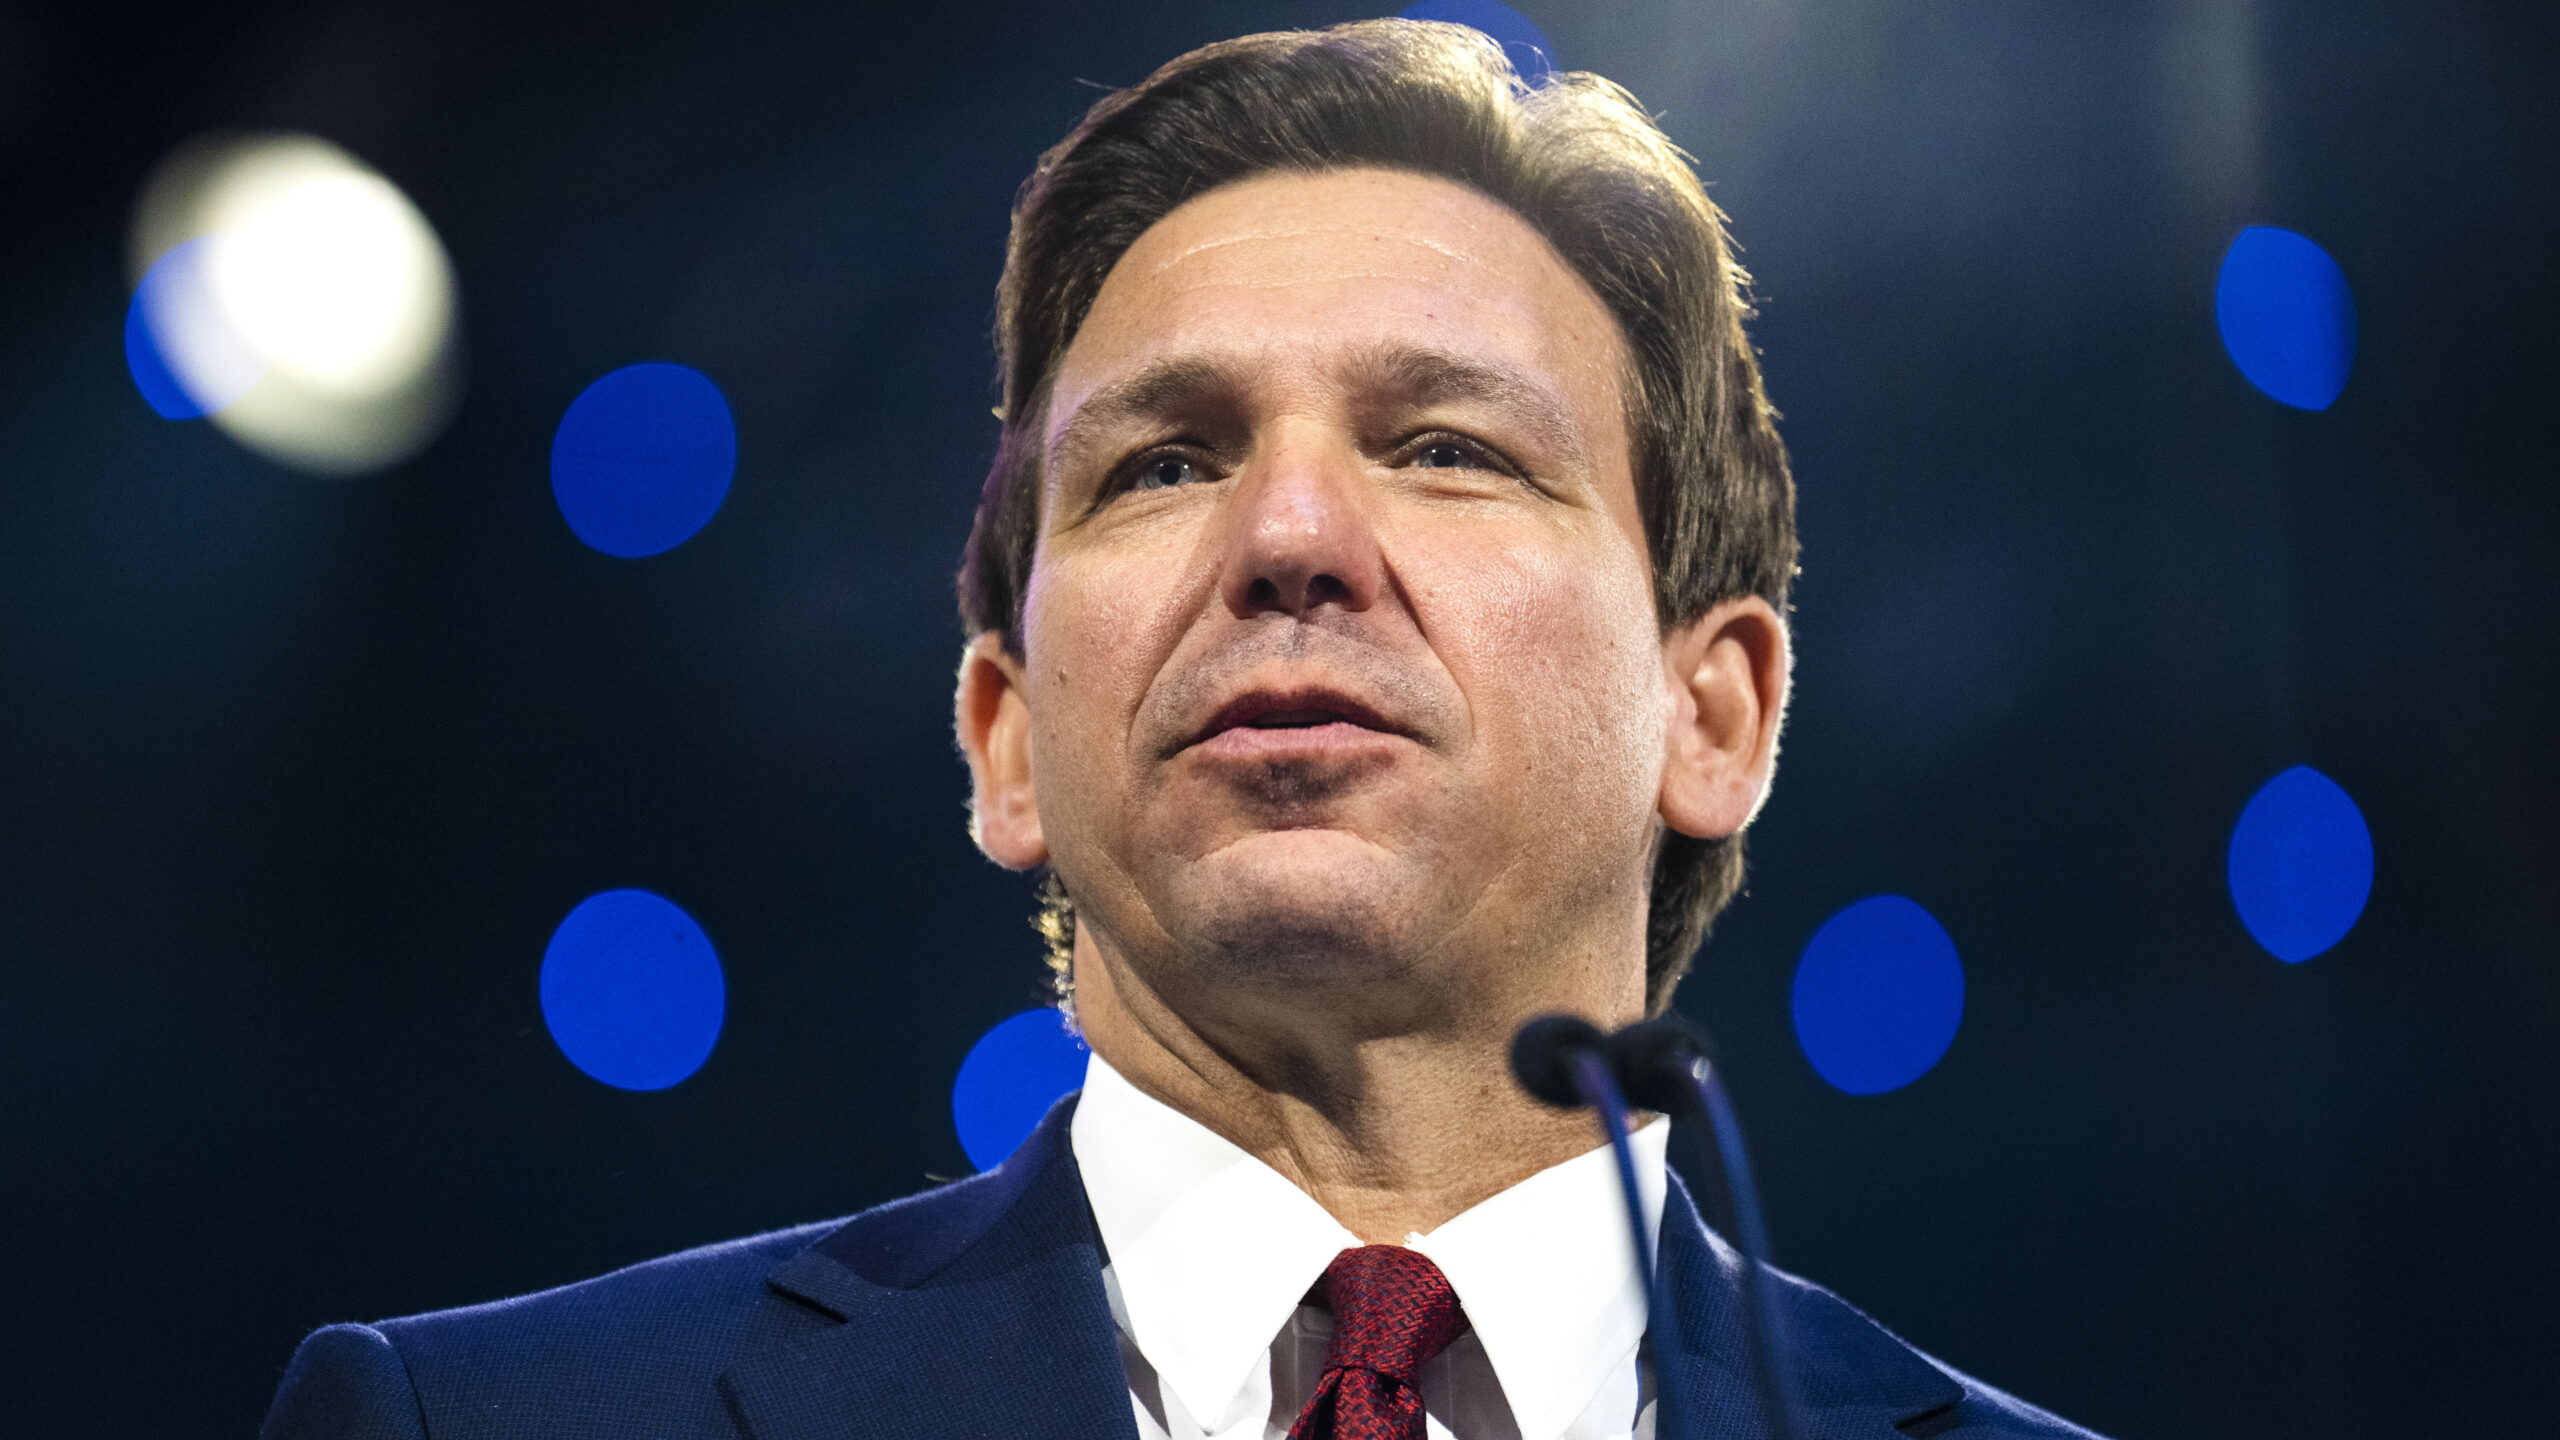 DeSantis Smashes New Hampshire GOP Record With ‘Largest Fundraiser’ In History: Report